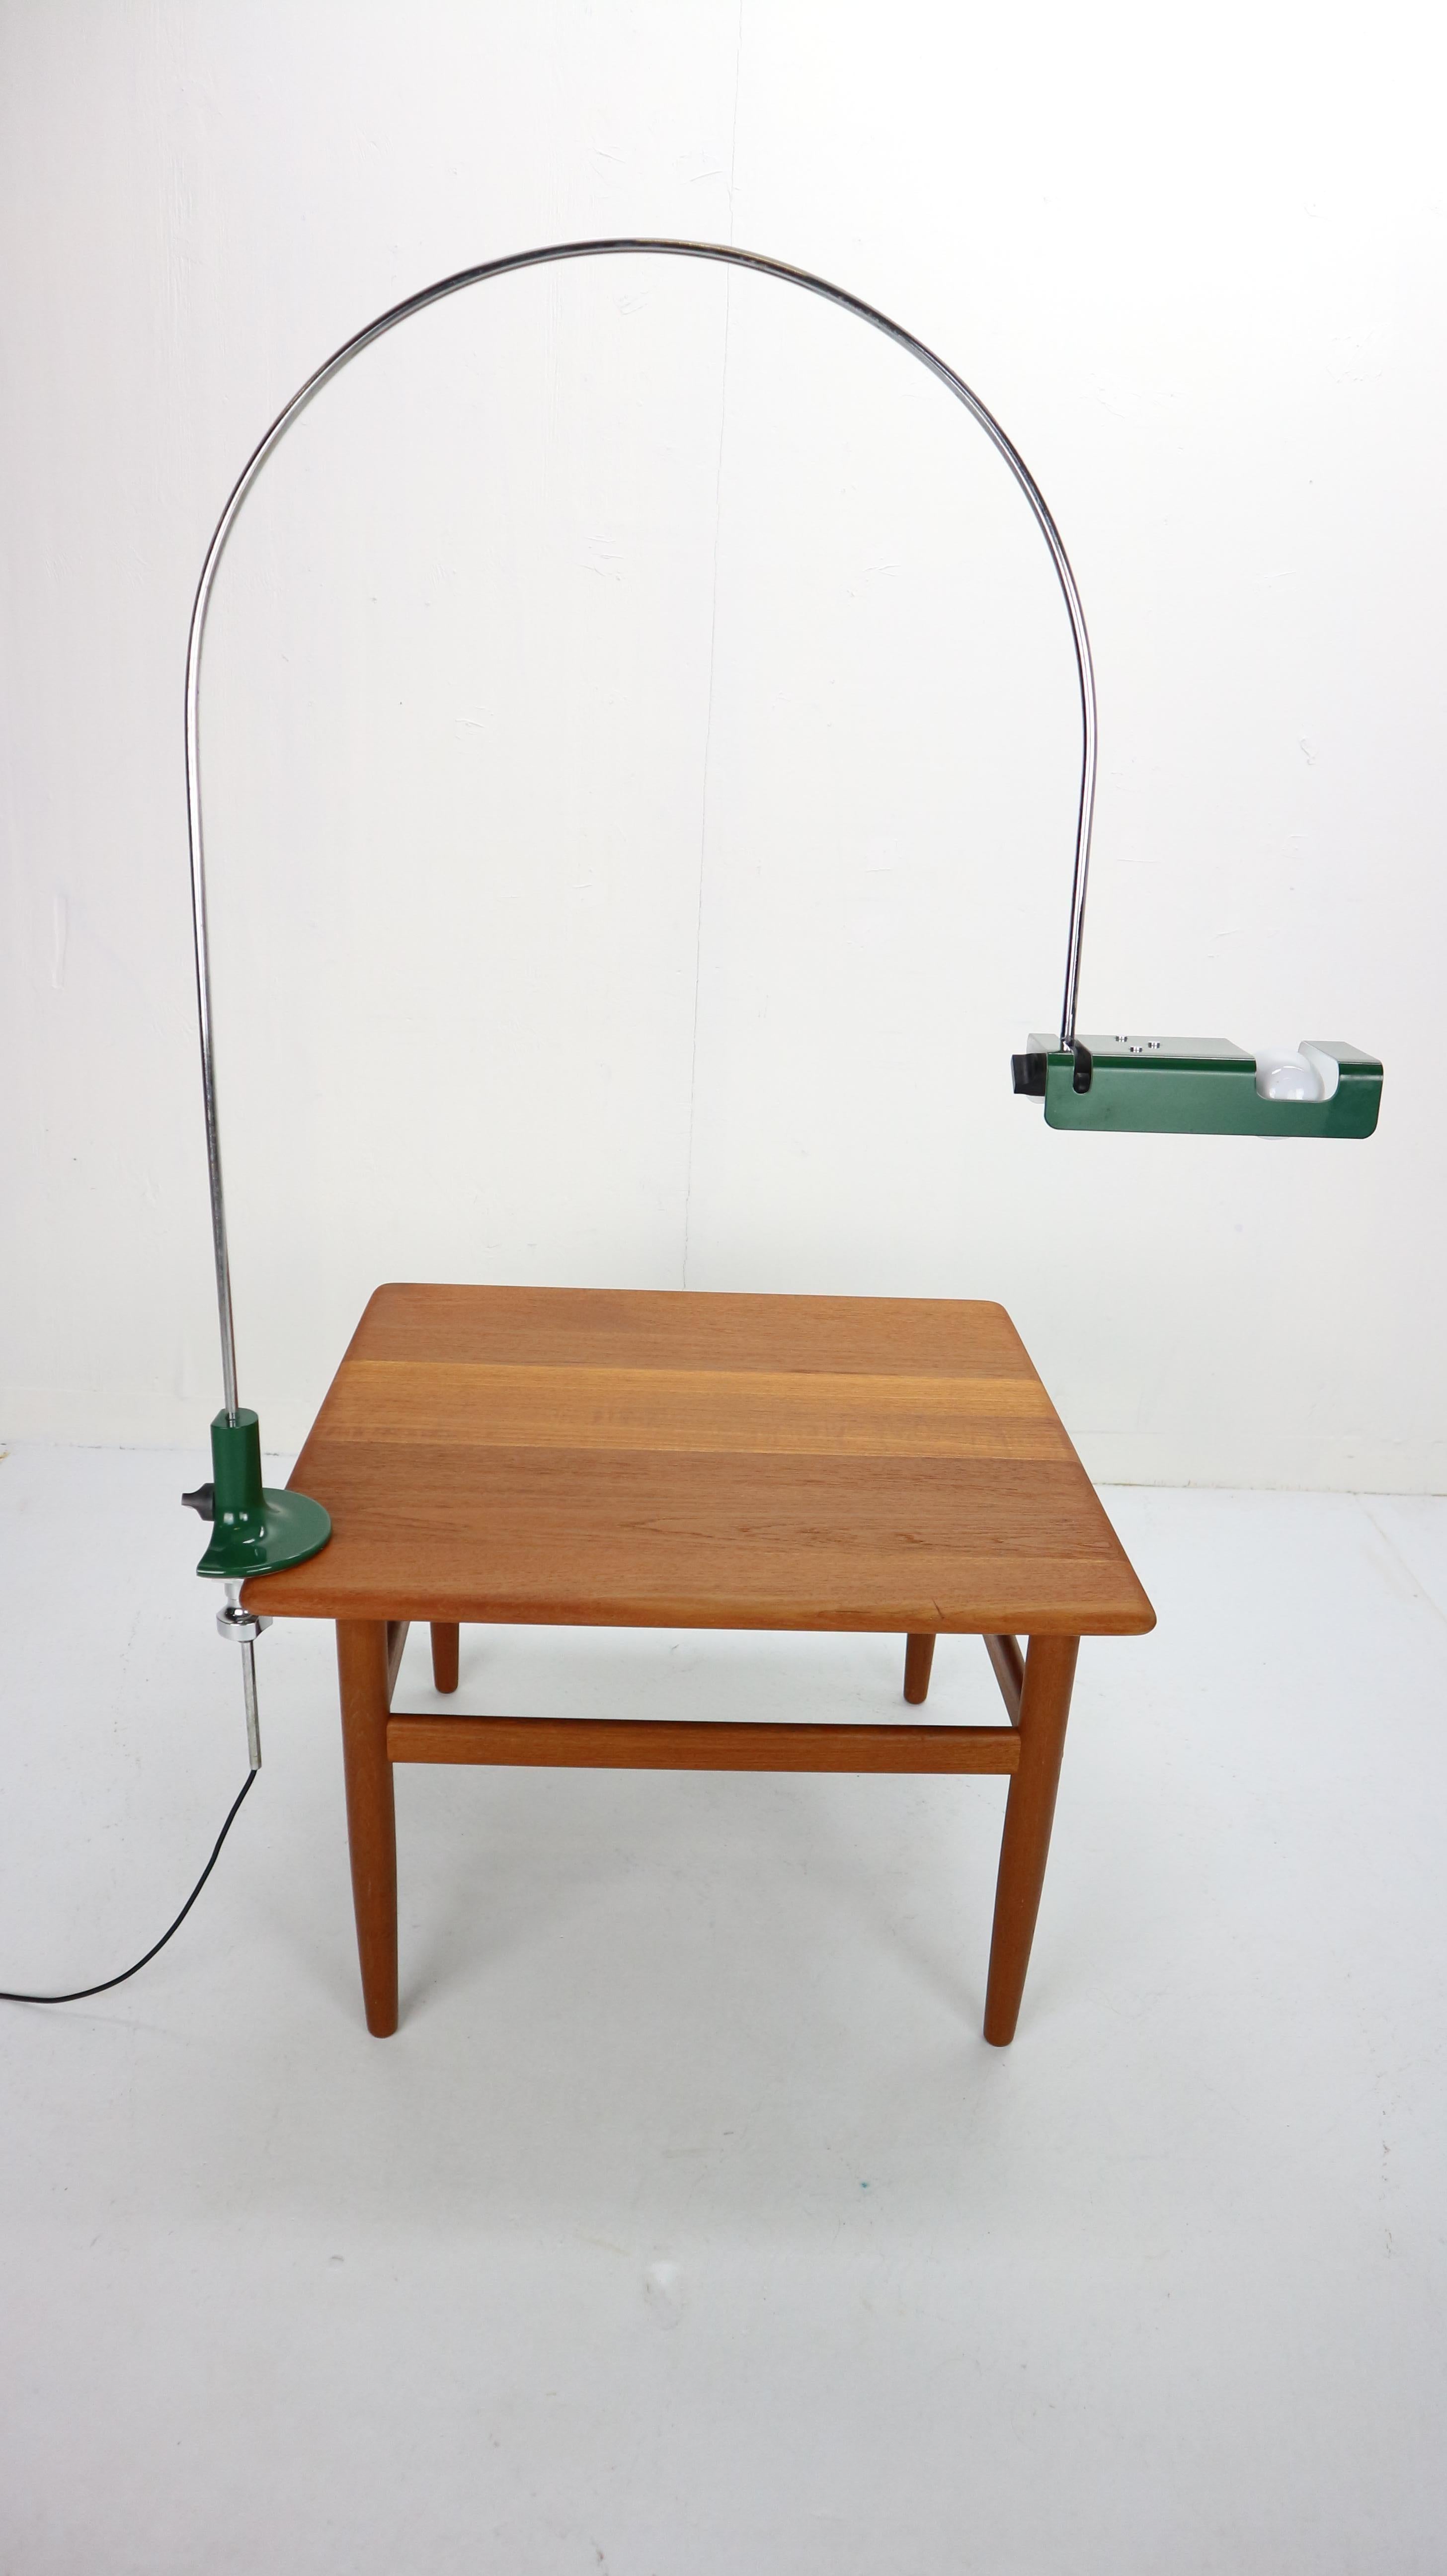 A Minimalist sculptural Mid-Century Modern desk or table lamp from the 1960s designed by Joe Colombo for Oluce, Italy.
Model- 293.
Height-adjustable and rotatable with a tiltable and rotatable shade on an arched chrome-plated steel arm.